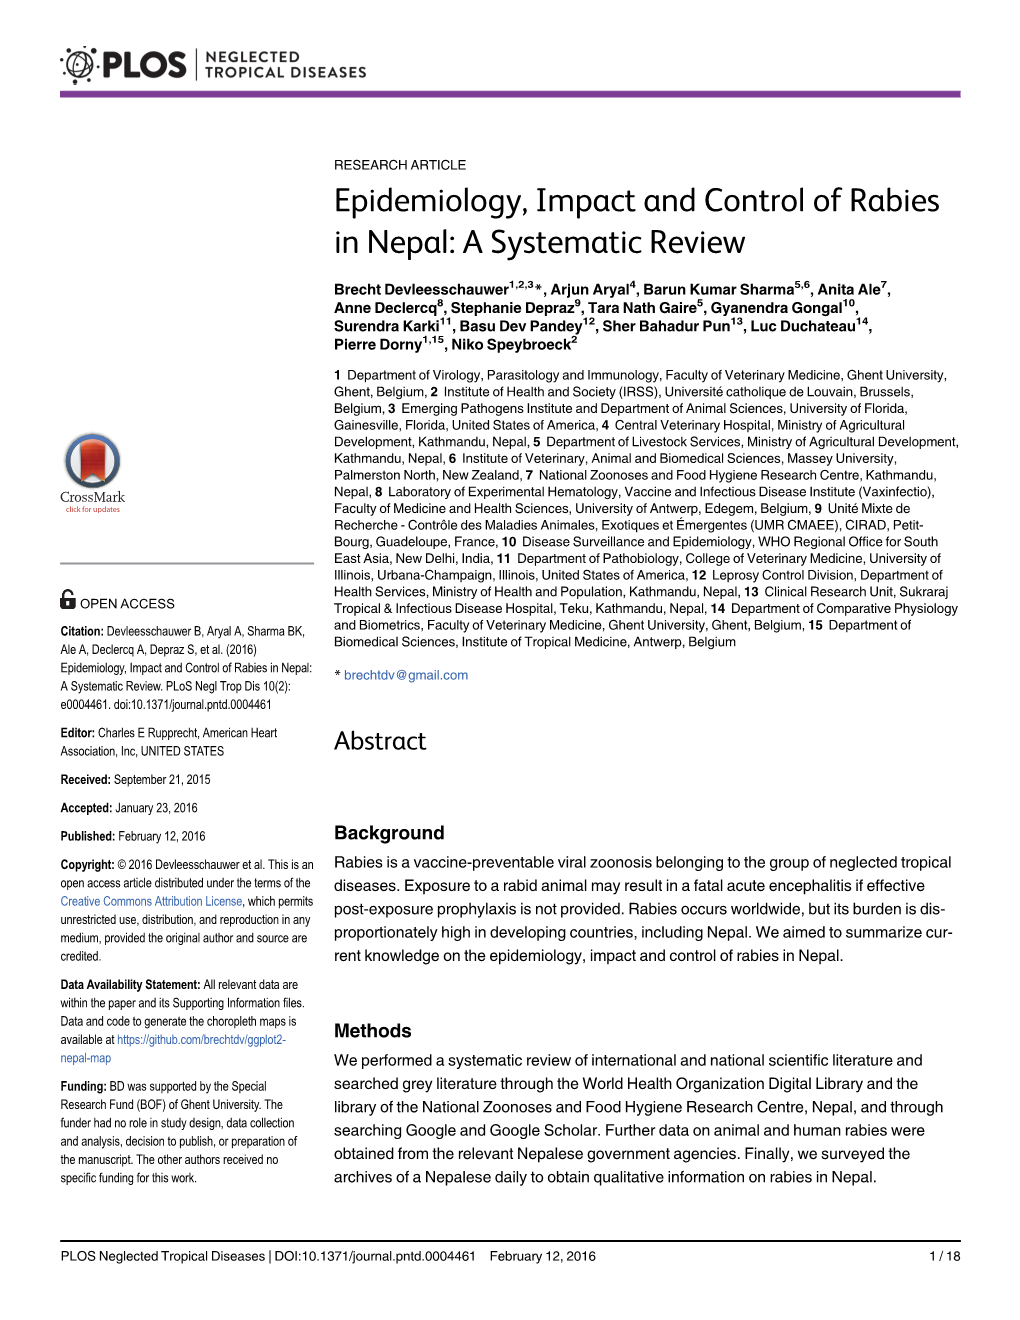 Epidemiology, Impact and Control of Rabies in Nepal: a Systematic Review